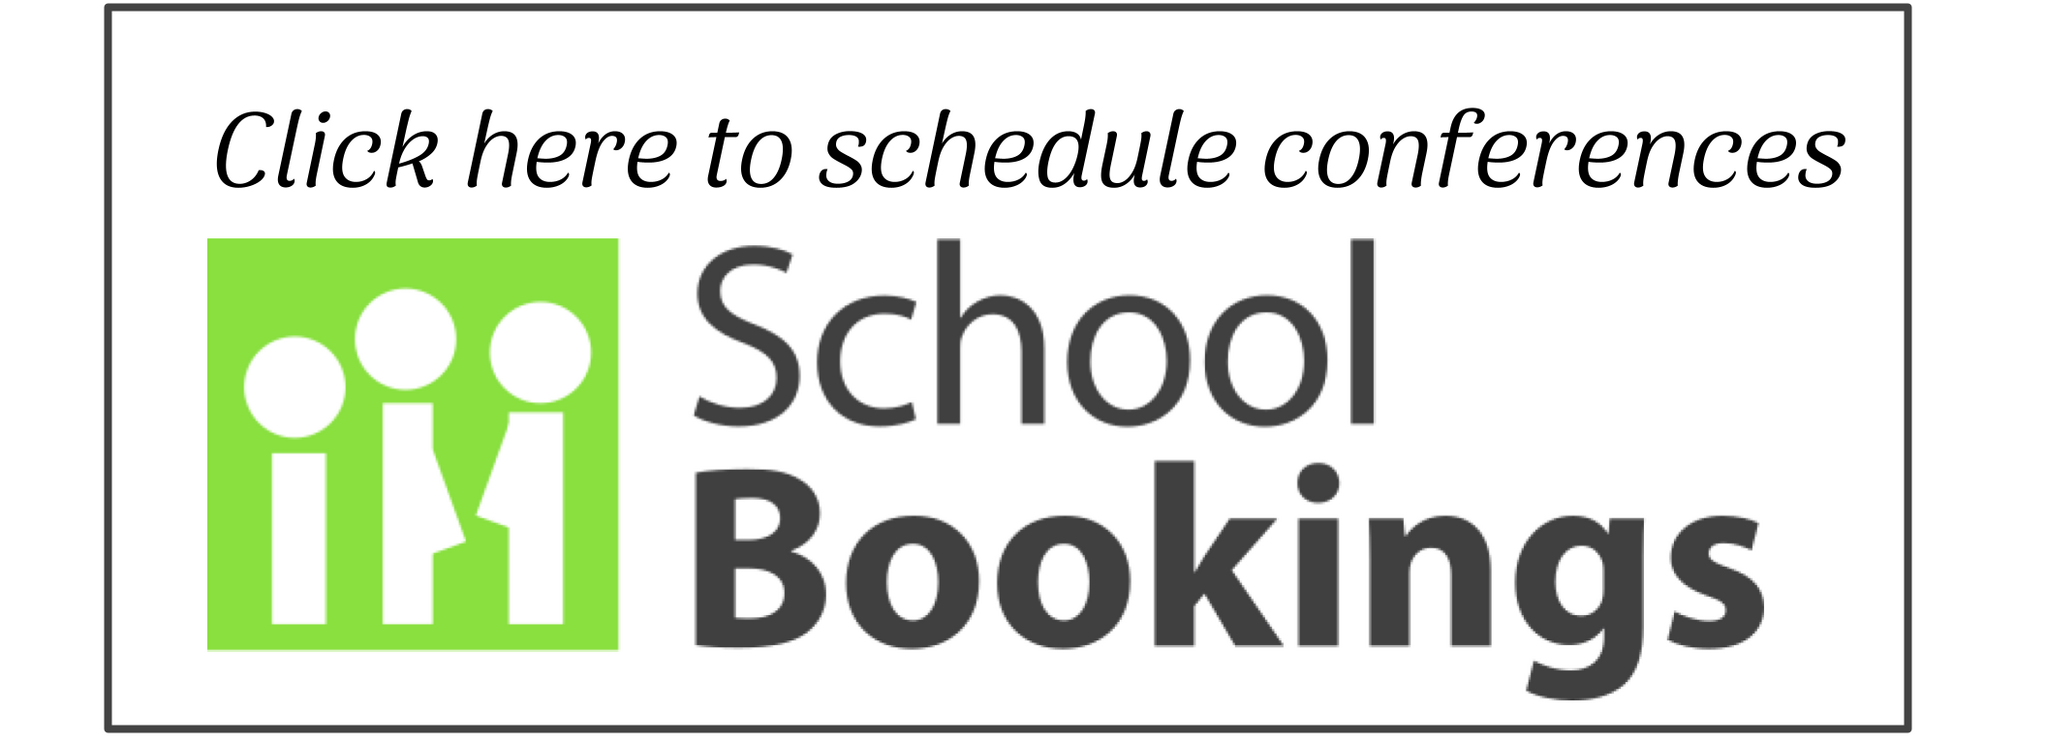 School Bookings Graphic